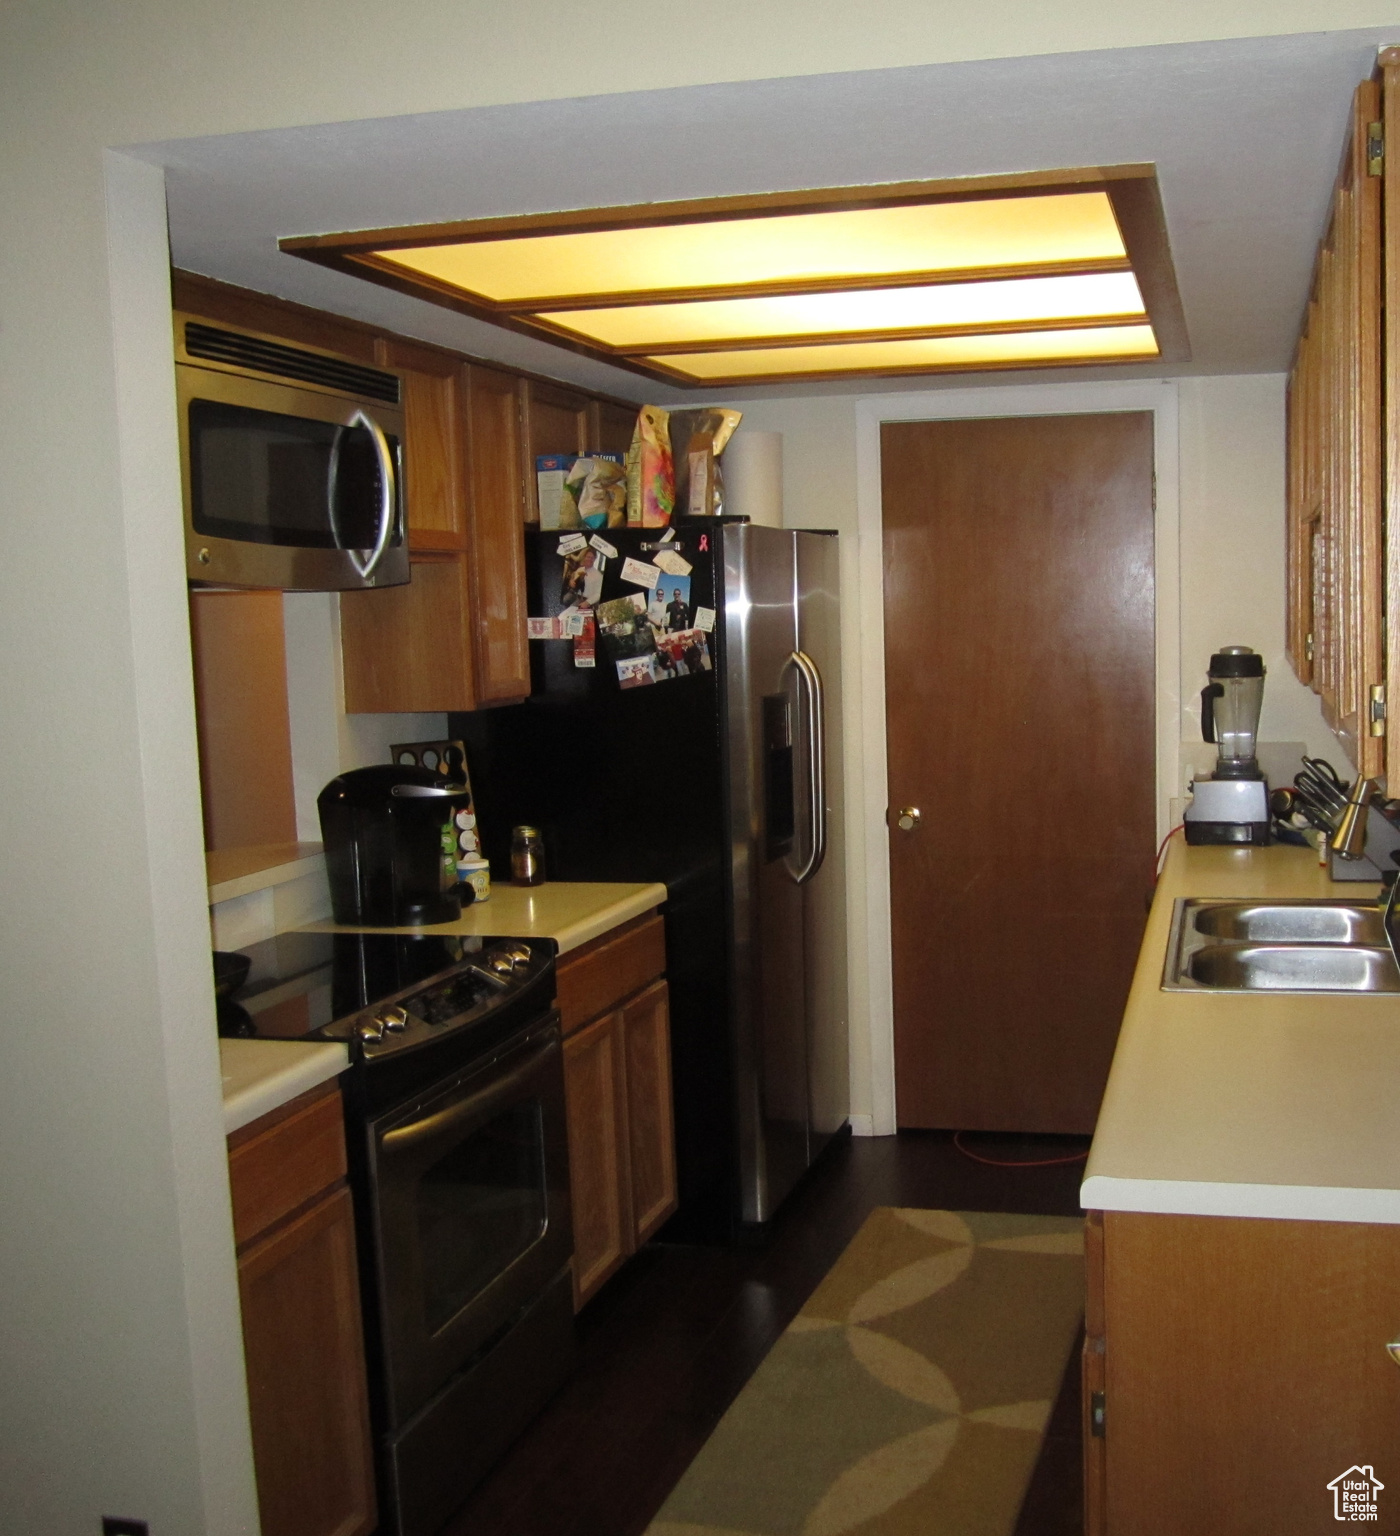 Kitchen featuring electric range, microwave and sink